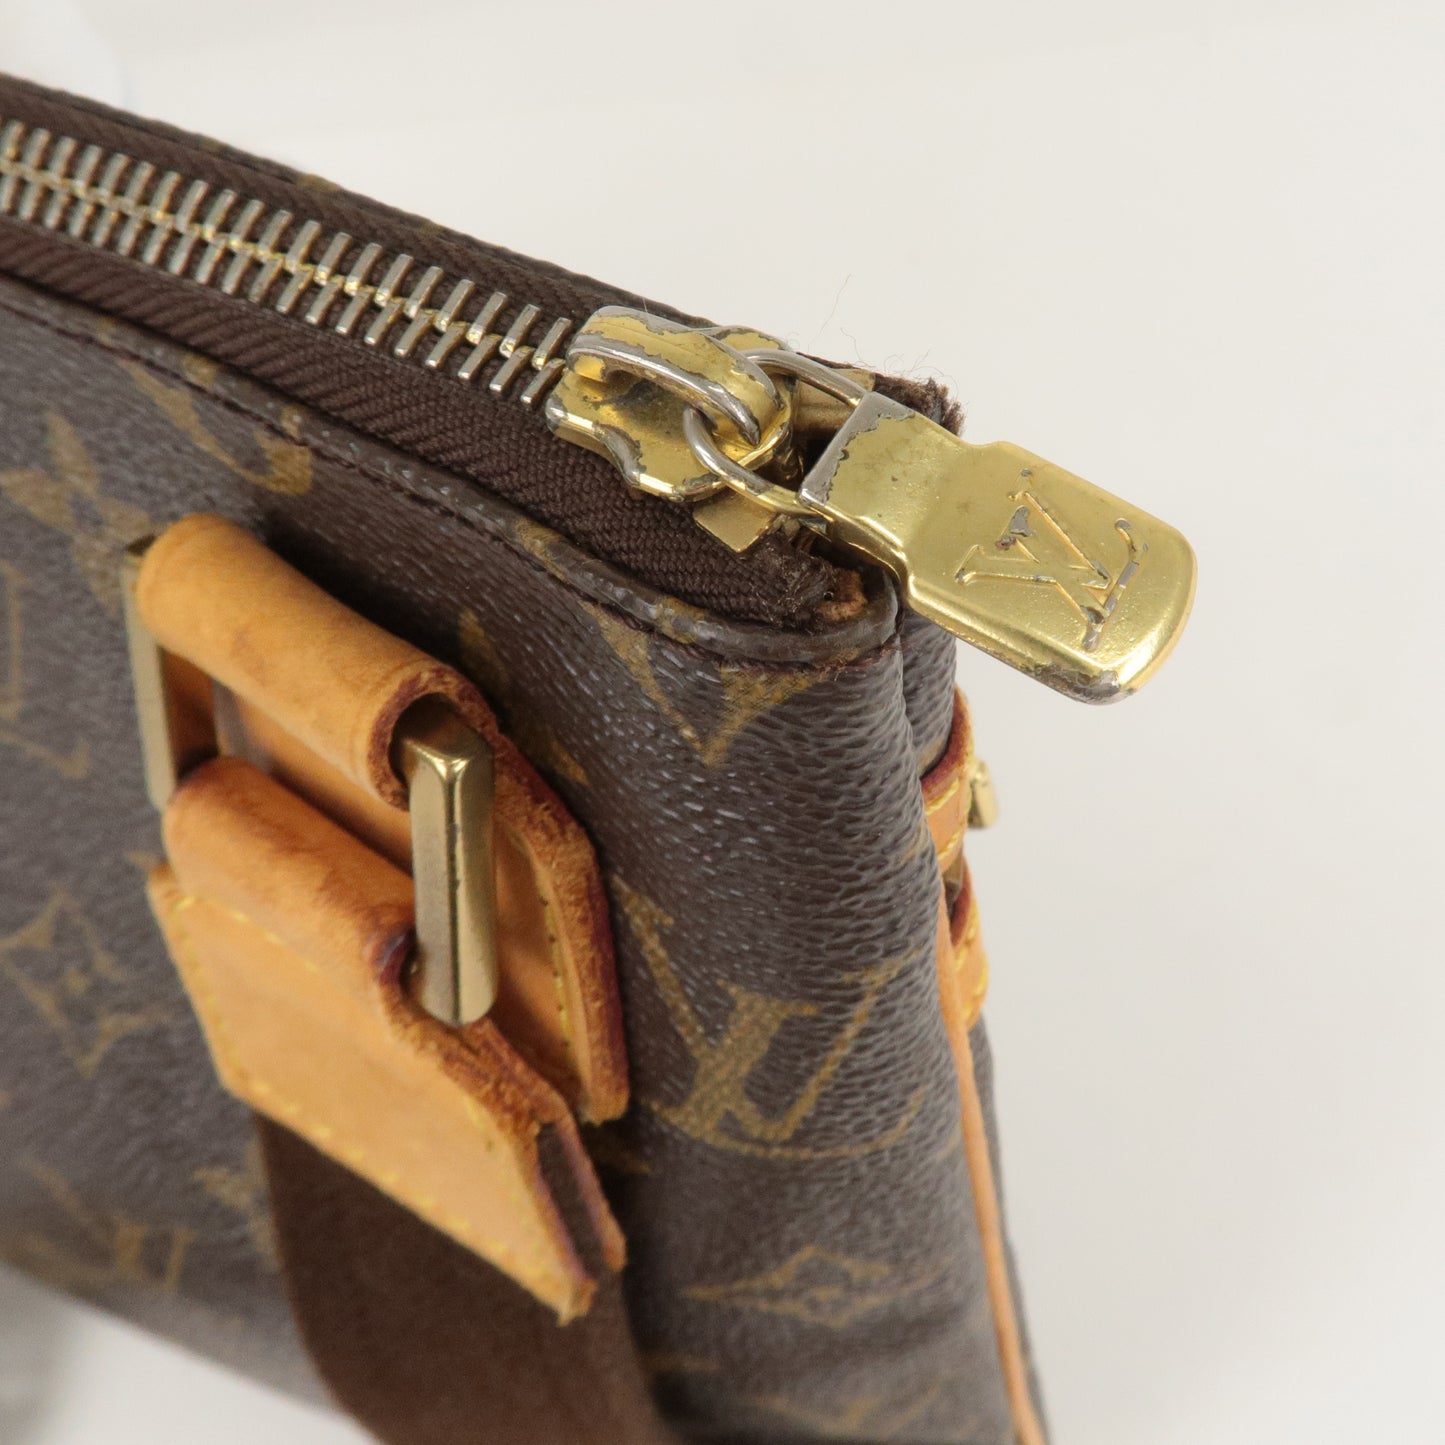 Buy [Used] LOUIS VUITTON Pochette Bosphor No Gusset Shoulder Bag Monogram  M40044 from Japan - Buy authentic Plus exclusive items from Japan